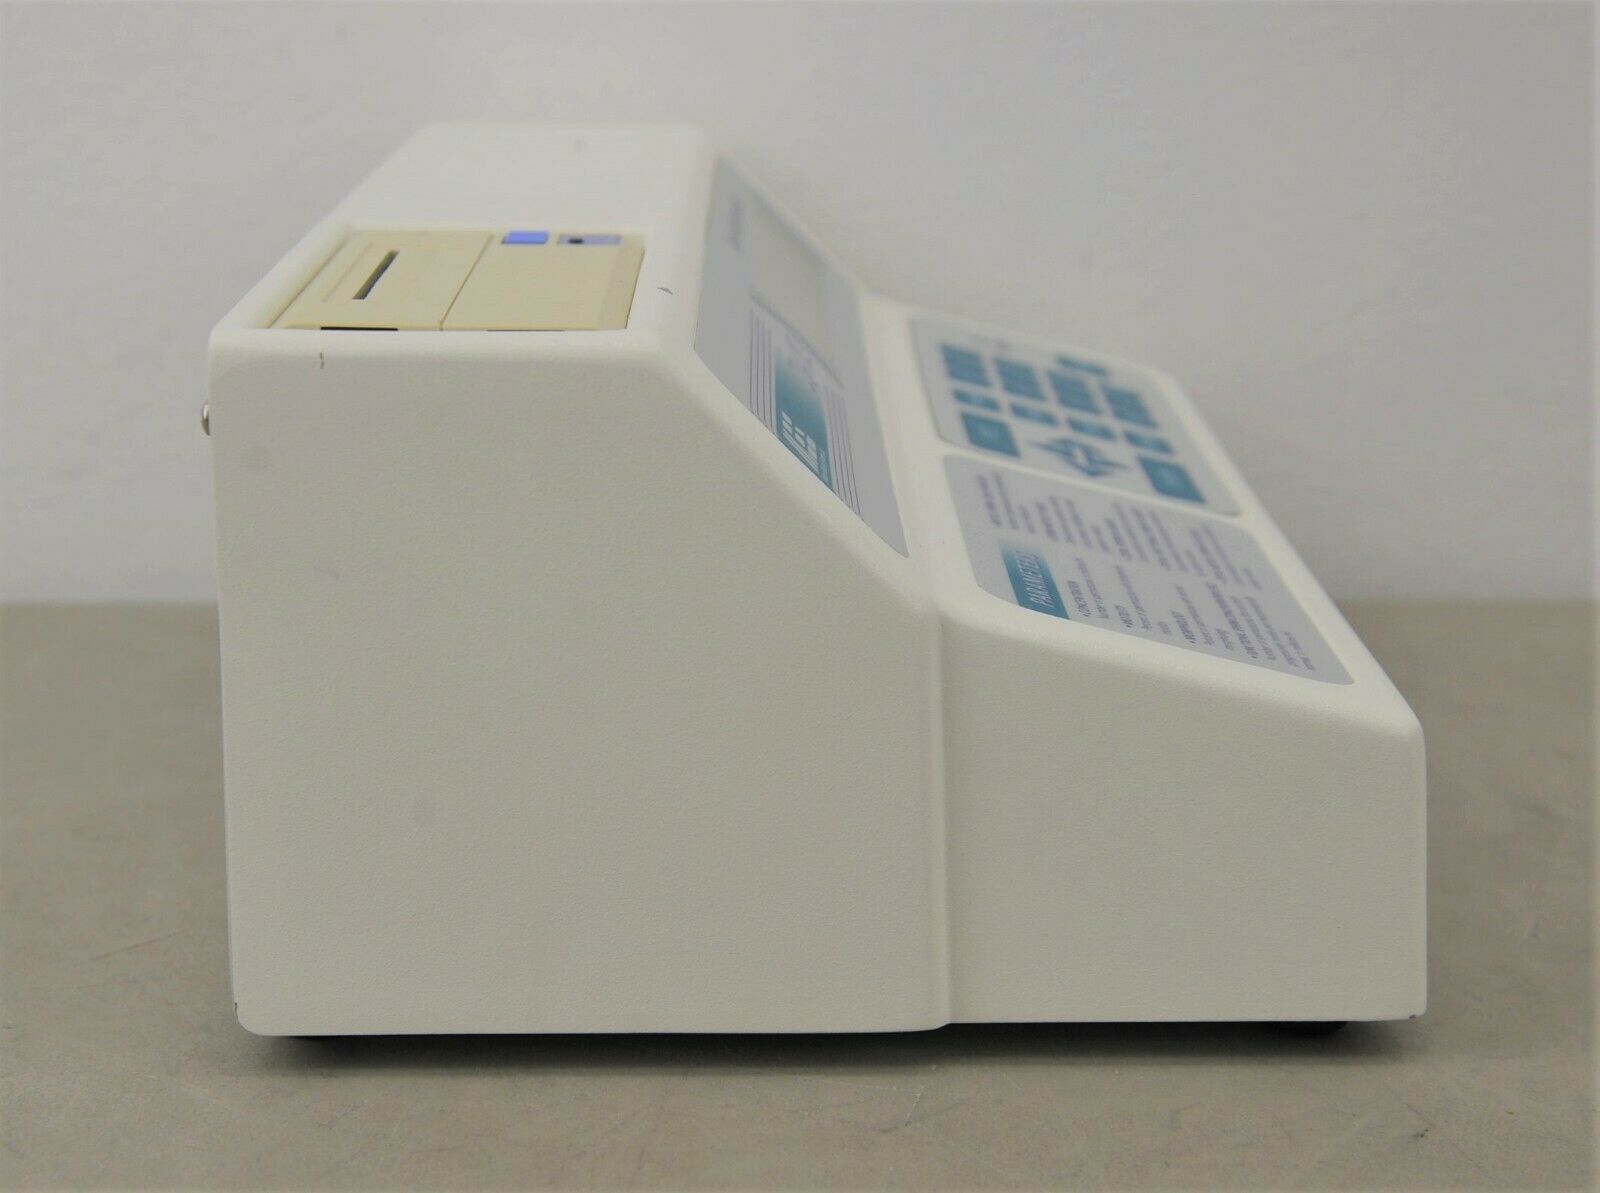 https://www.rhinotradellc.com/wp-content/uploads/imported/0/MES-Medical-Electronic-Systems-SQA-IIC-P-Sperm-Quality-Analyzer-21522-D12-264859894260-10.JPG